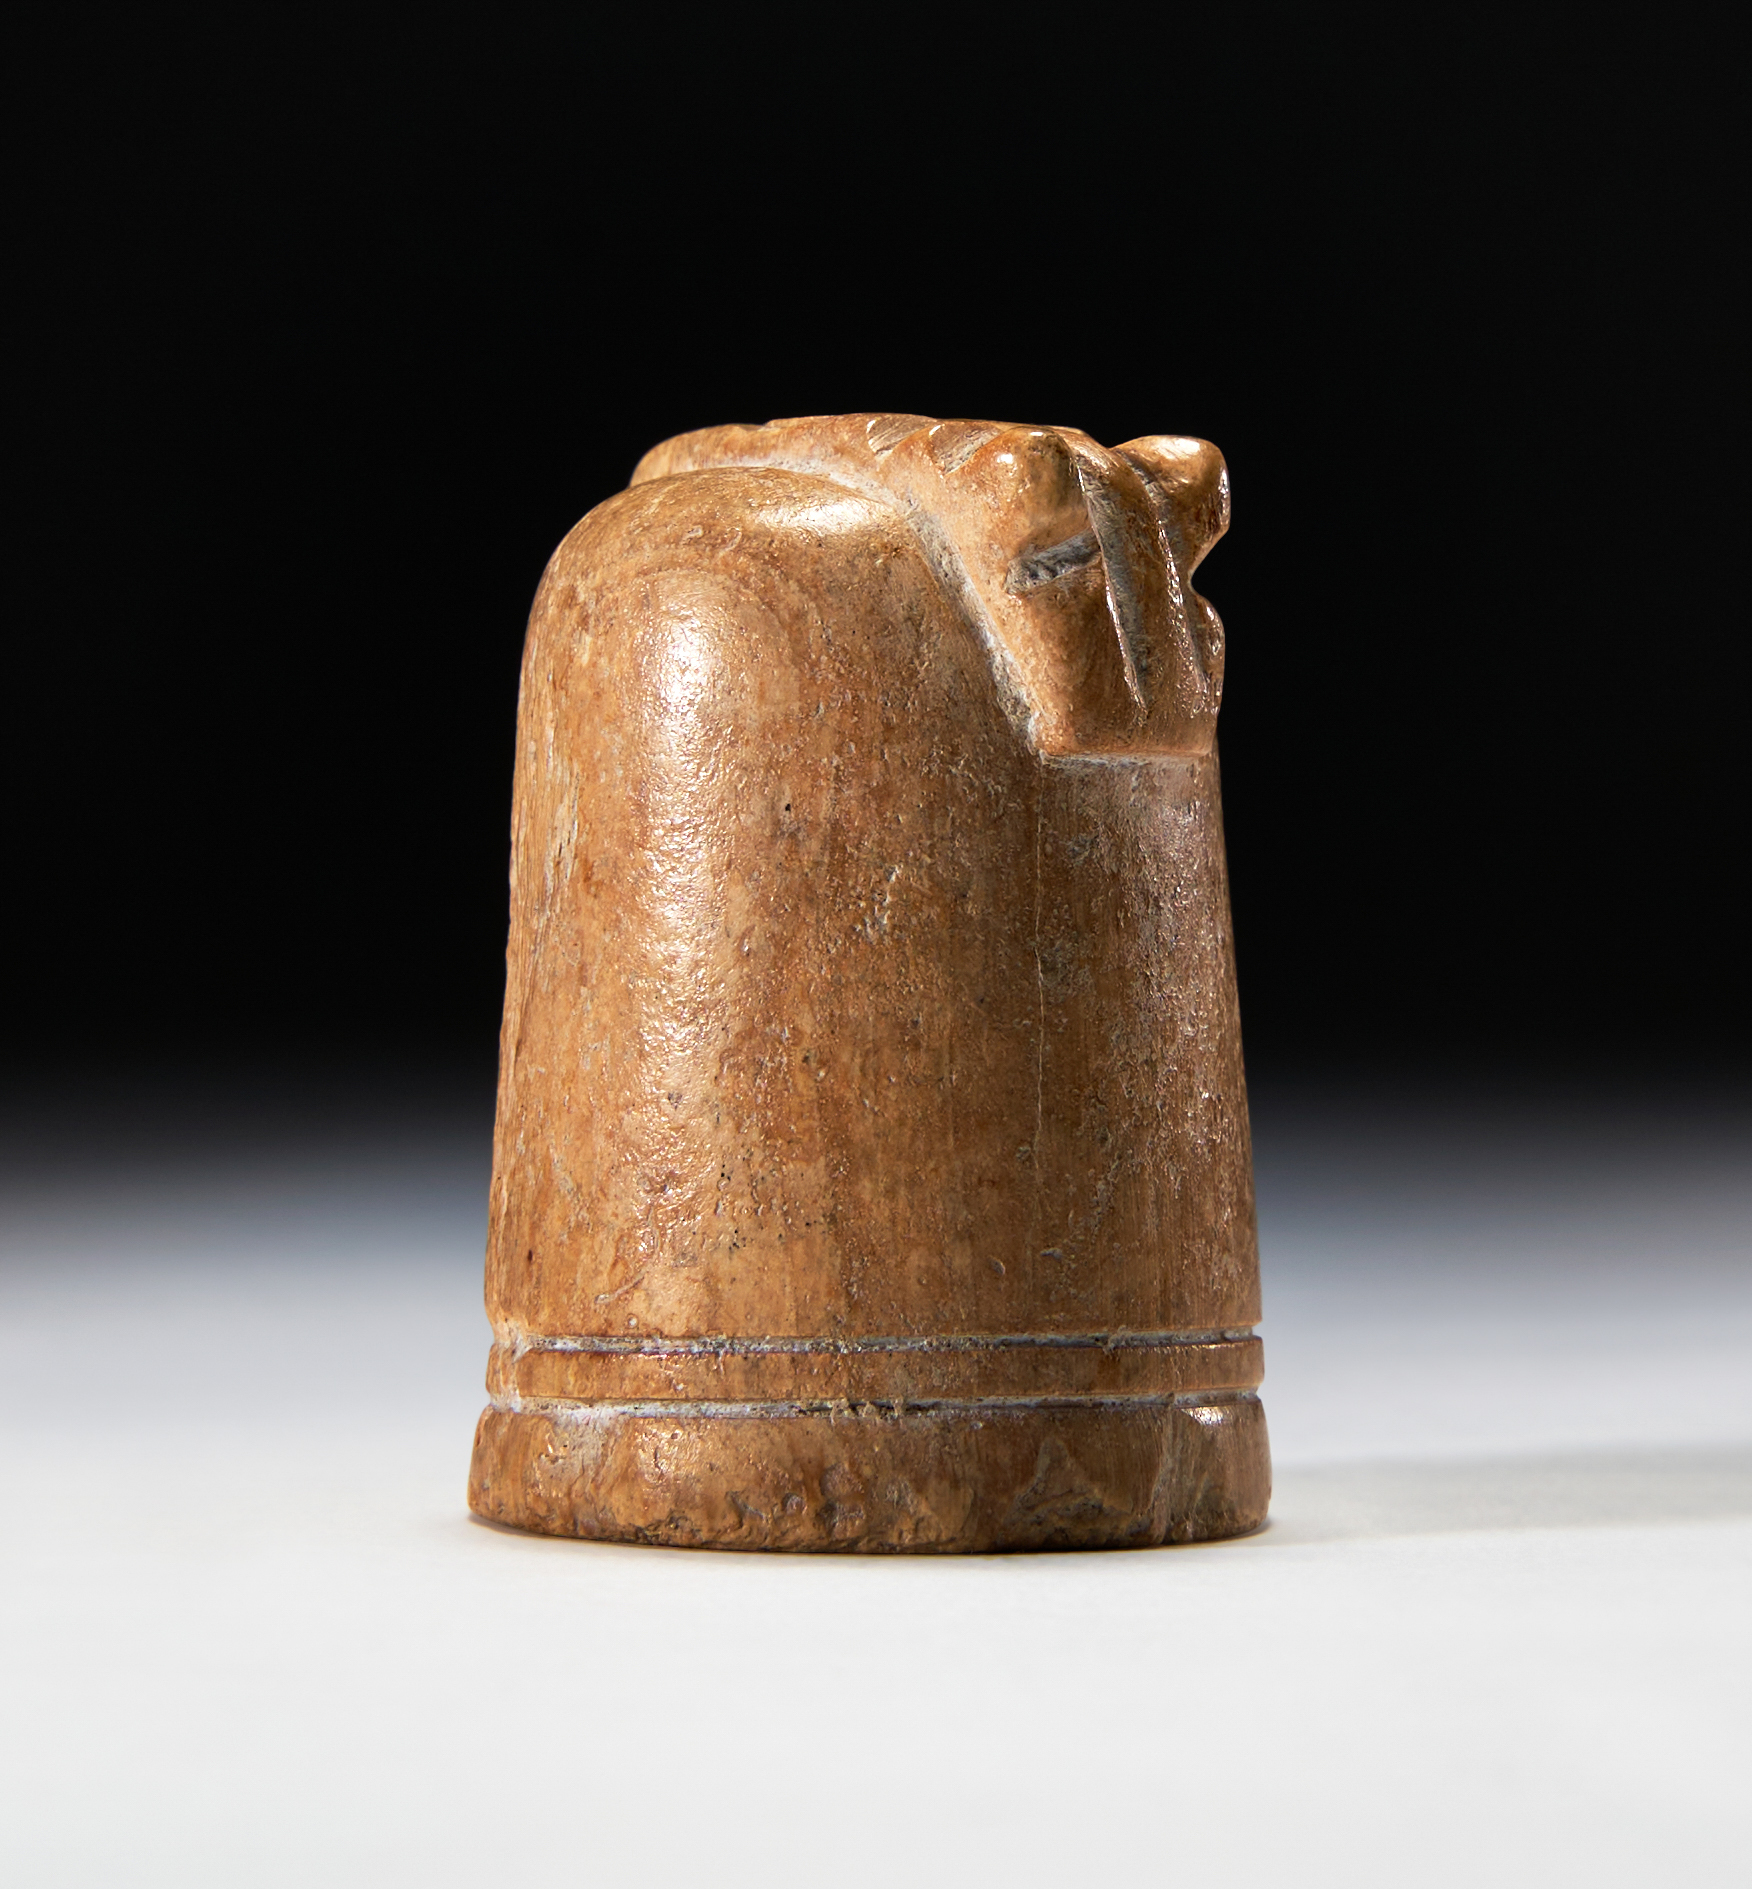 A LARGE BONE CHESS PIECE, PROBABLY A KNIGHT, 9TH-11TH CENTURY, FATIMID EGYPT